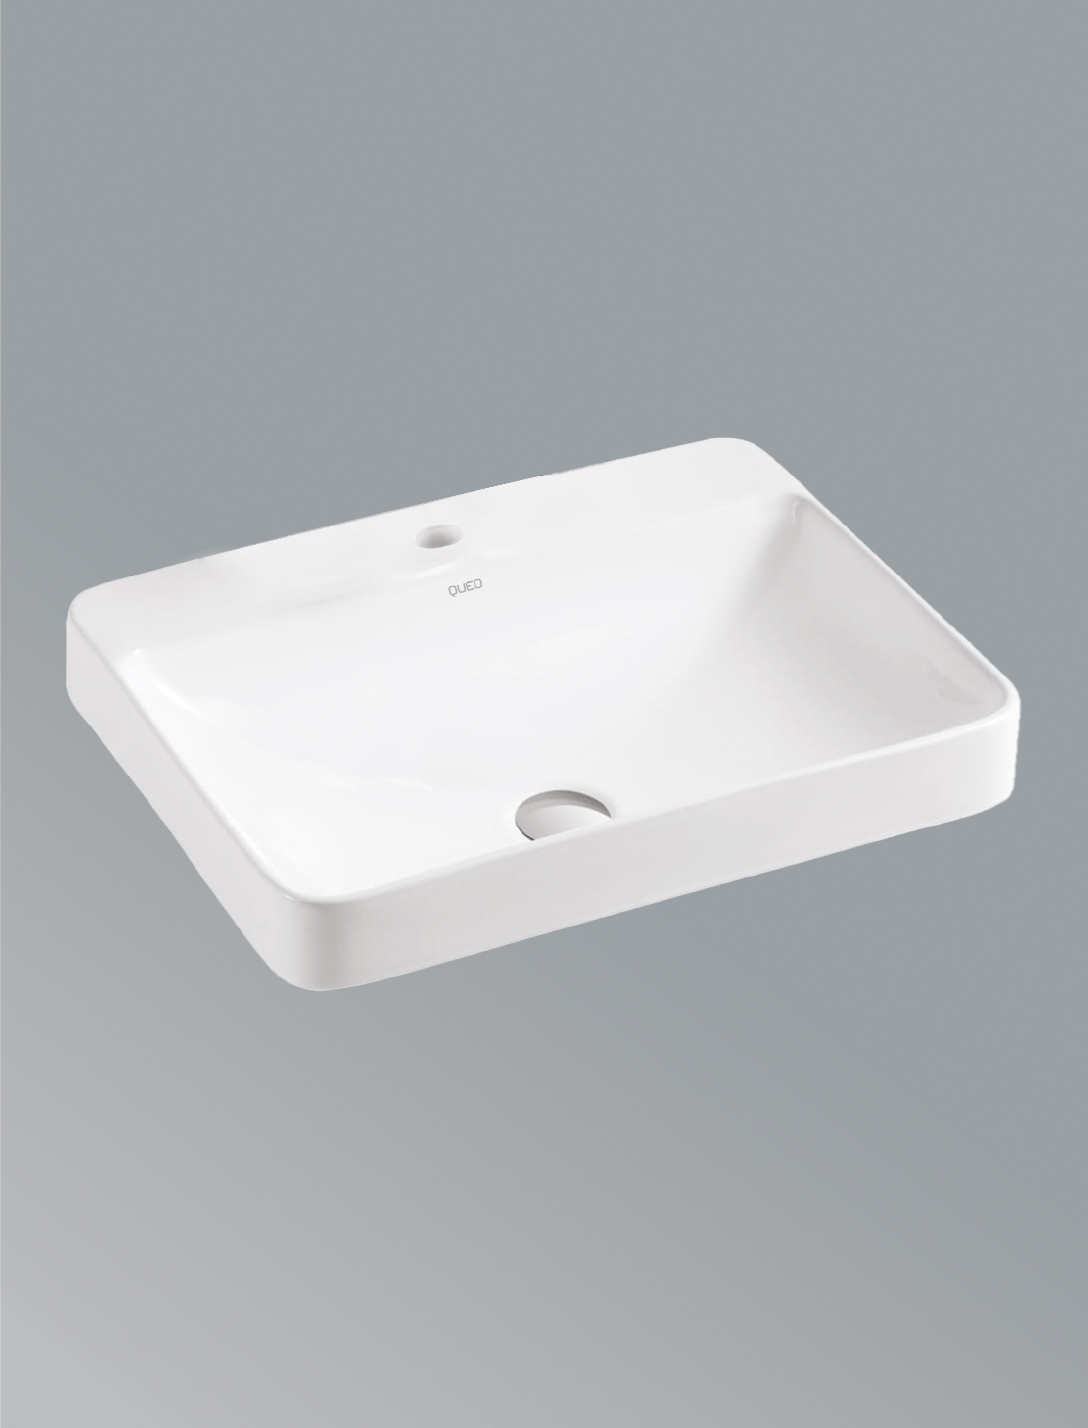 over-the-counter-basin-with-faucet-hole-in-white